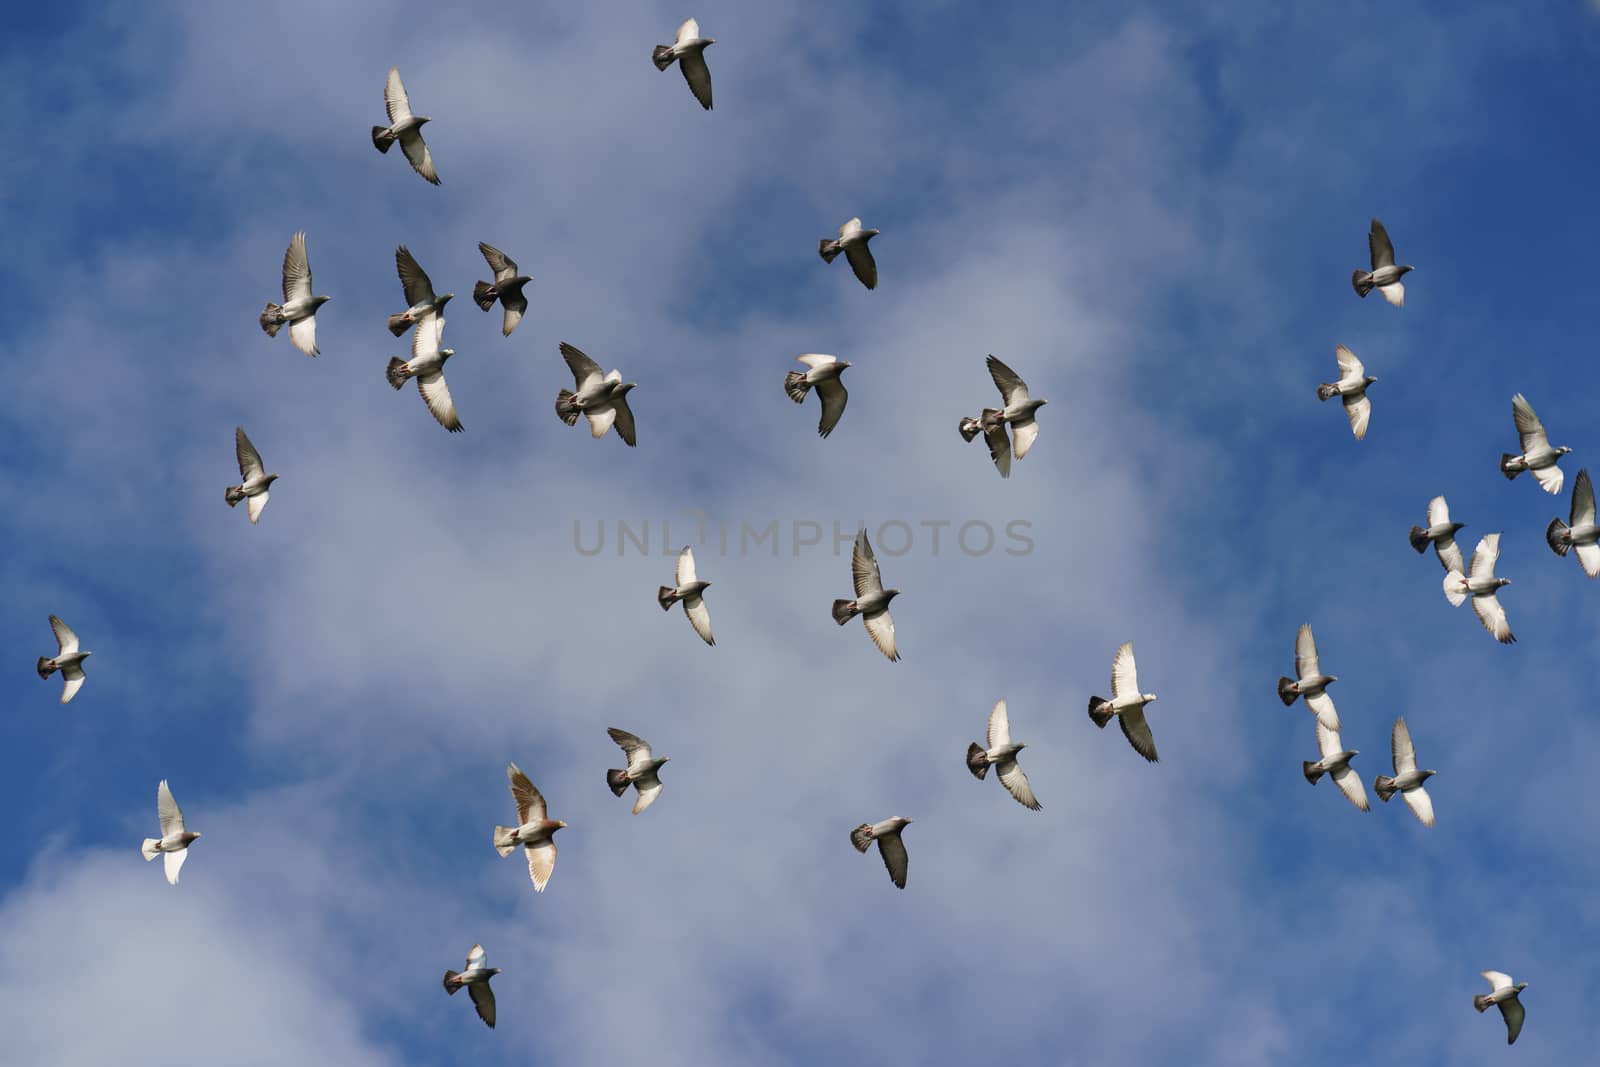 The general movement of a large number of birds